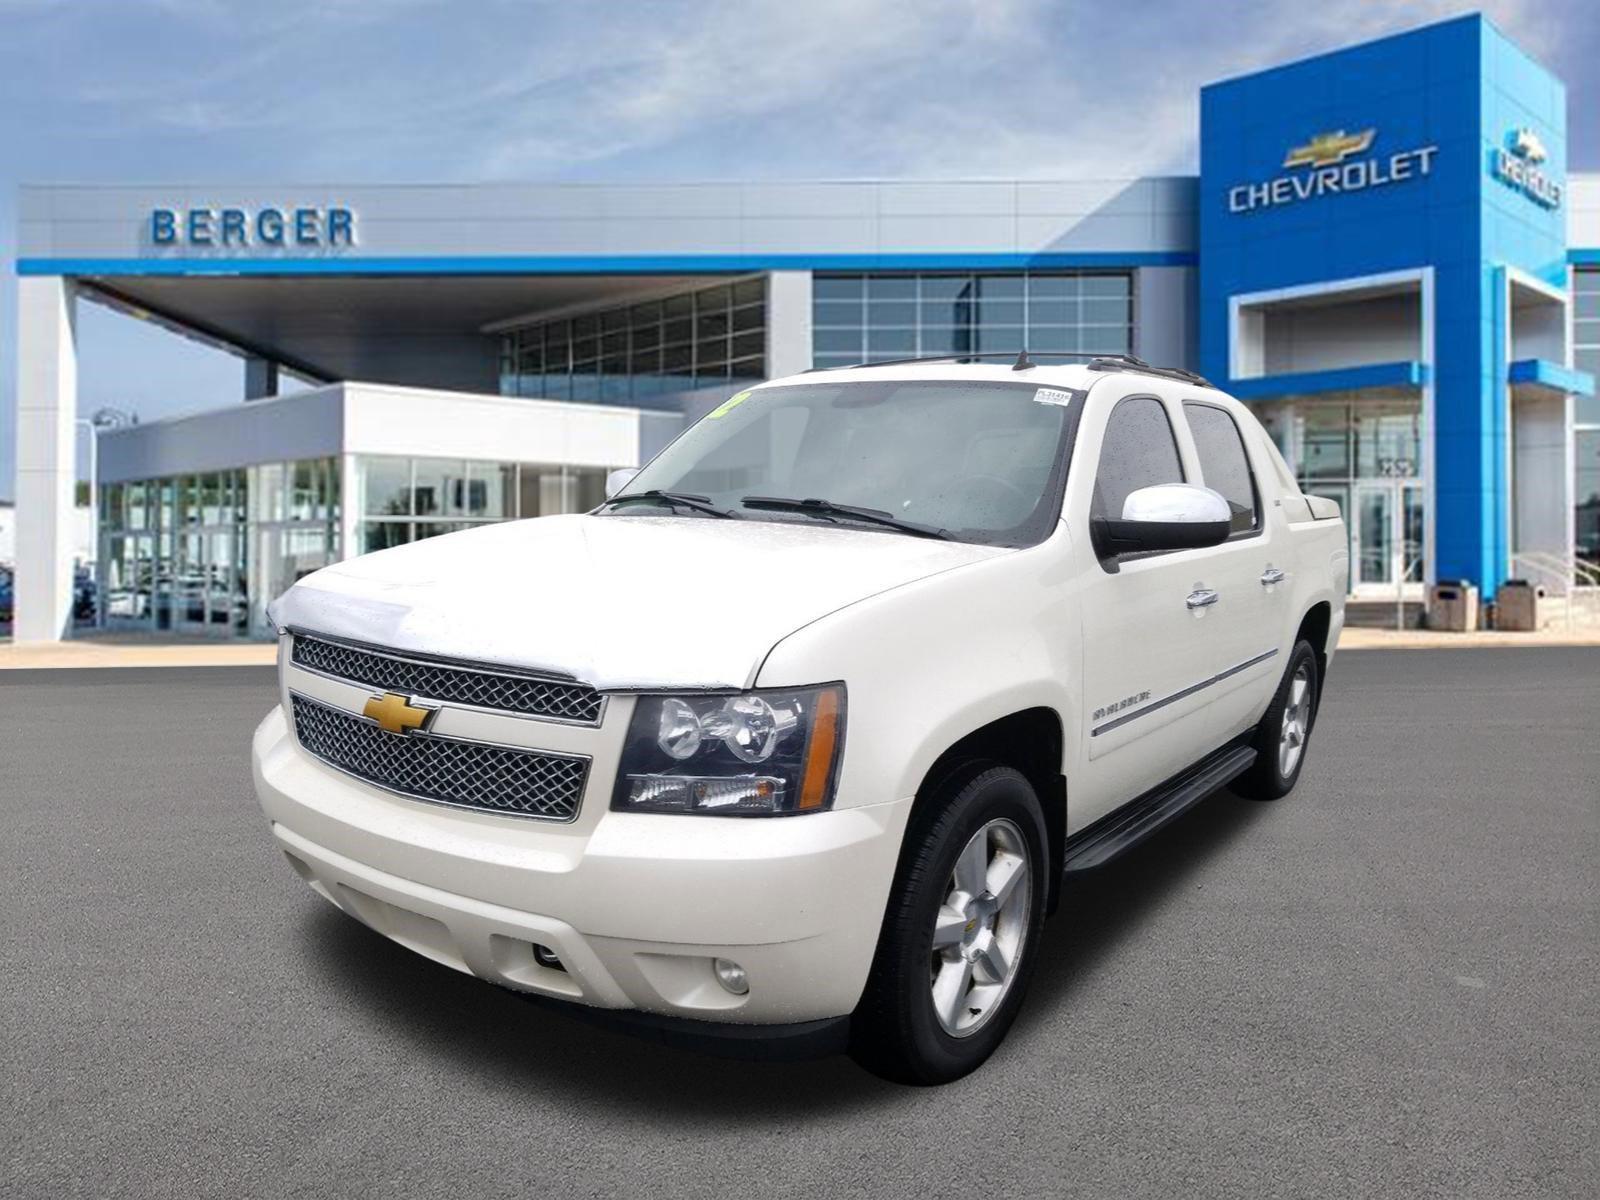 Pre-Owned 2012 Chevrolet Avalanche 4WD Crew Cab LTZ Crew Cab Pickup in  Grand Rapids #PL31416 | Berger Chevrolet, Inc.